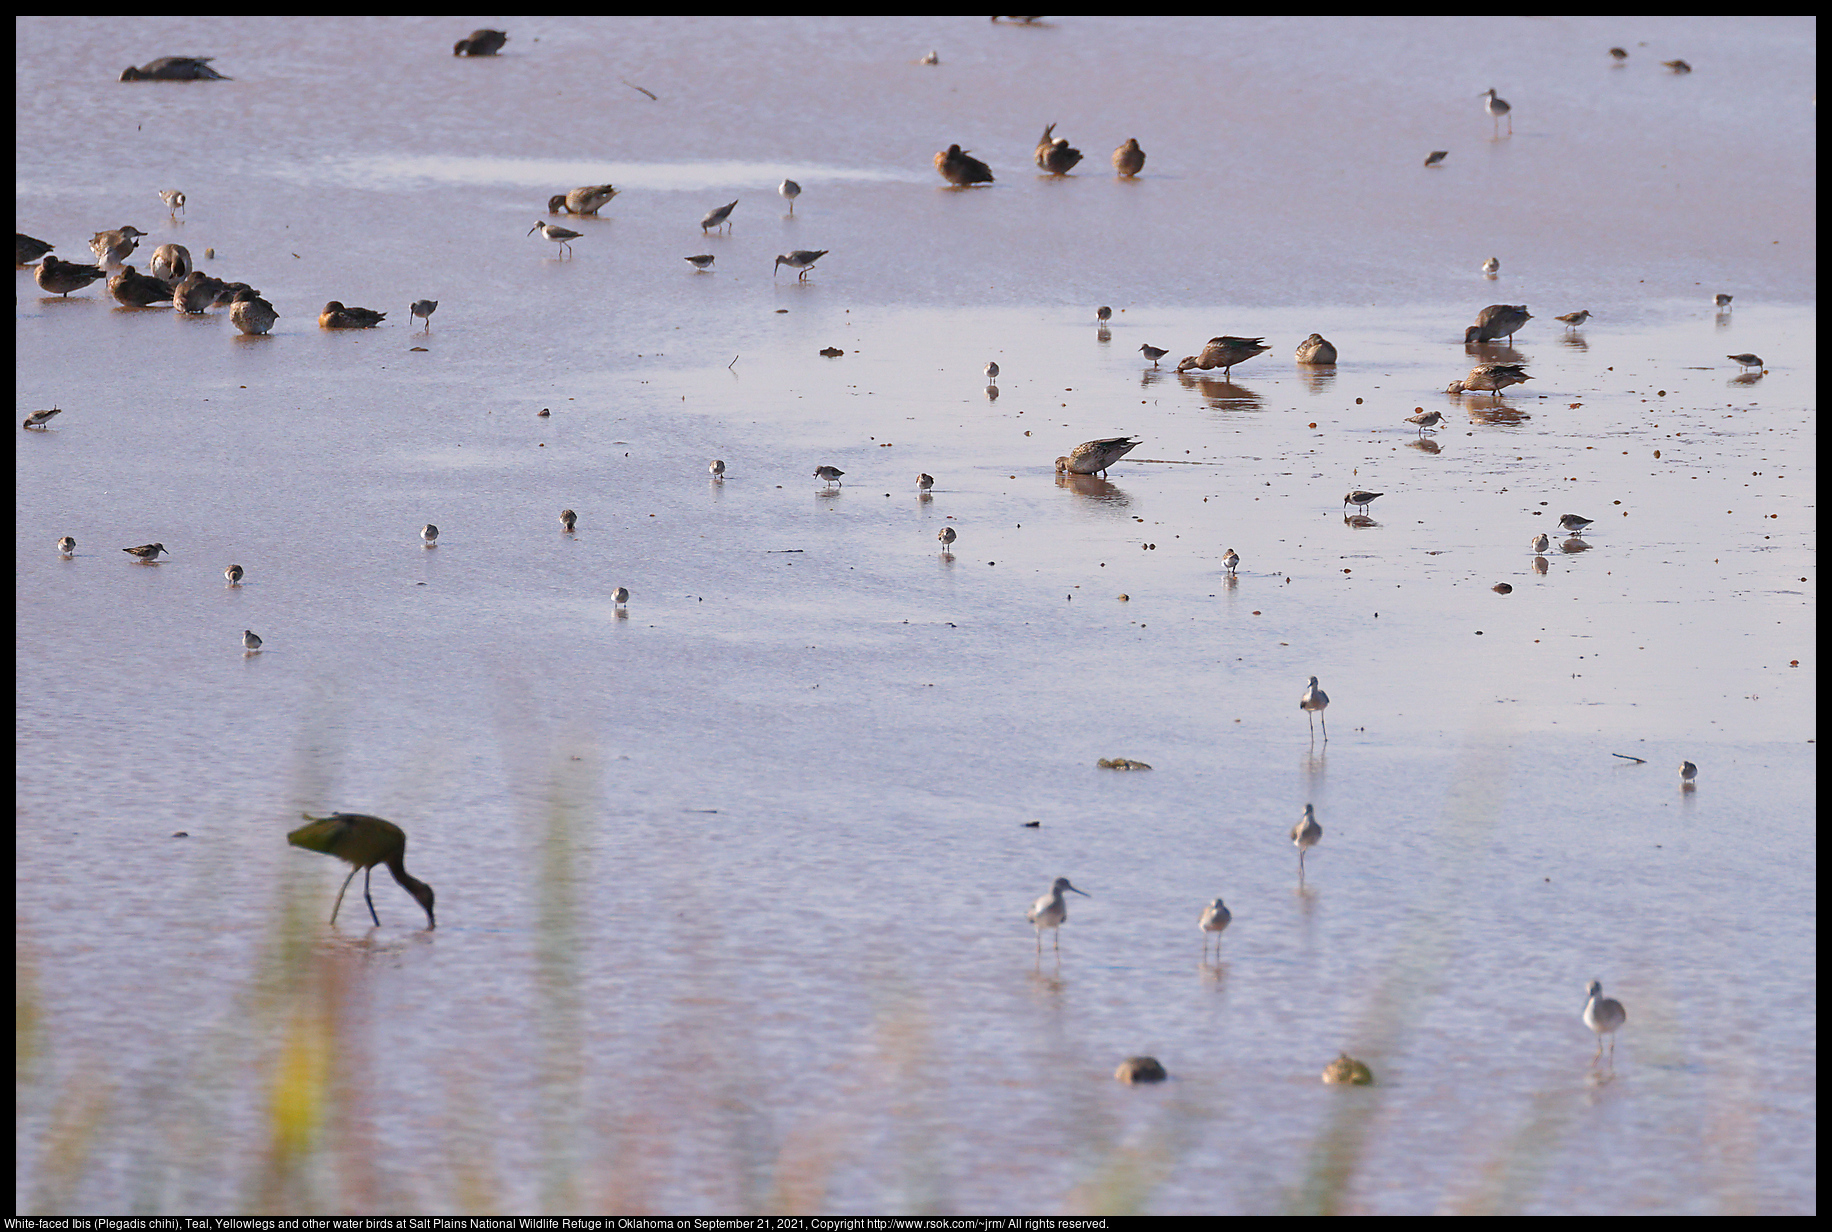 White-faced Ibis (Plegadis chihi), Teal, Yellowlegs and other water birds at Salt Plains National Wildlife Refuge in Oklahoma on September 21, 2021